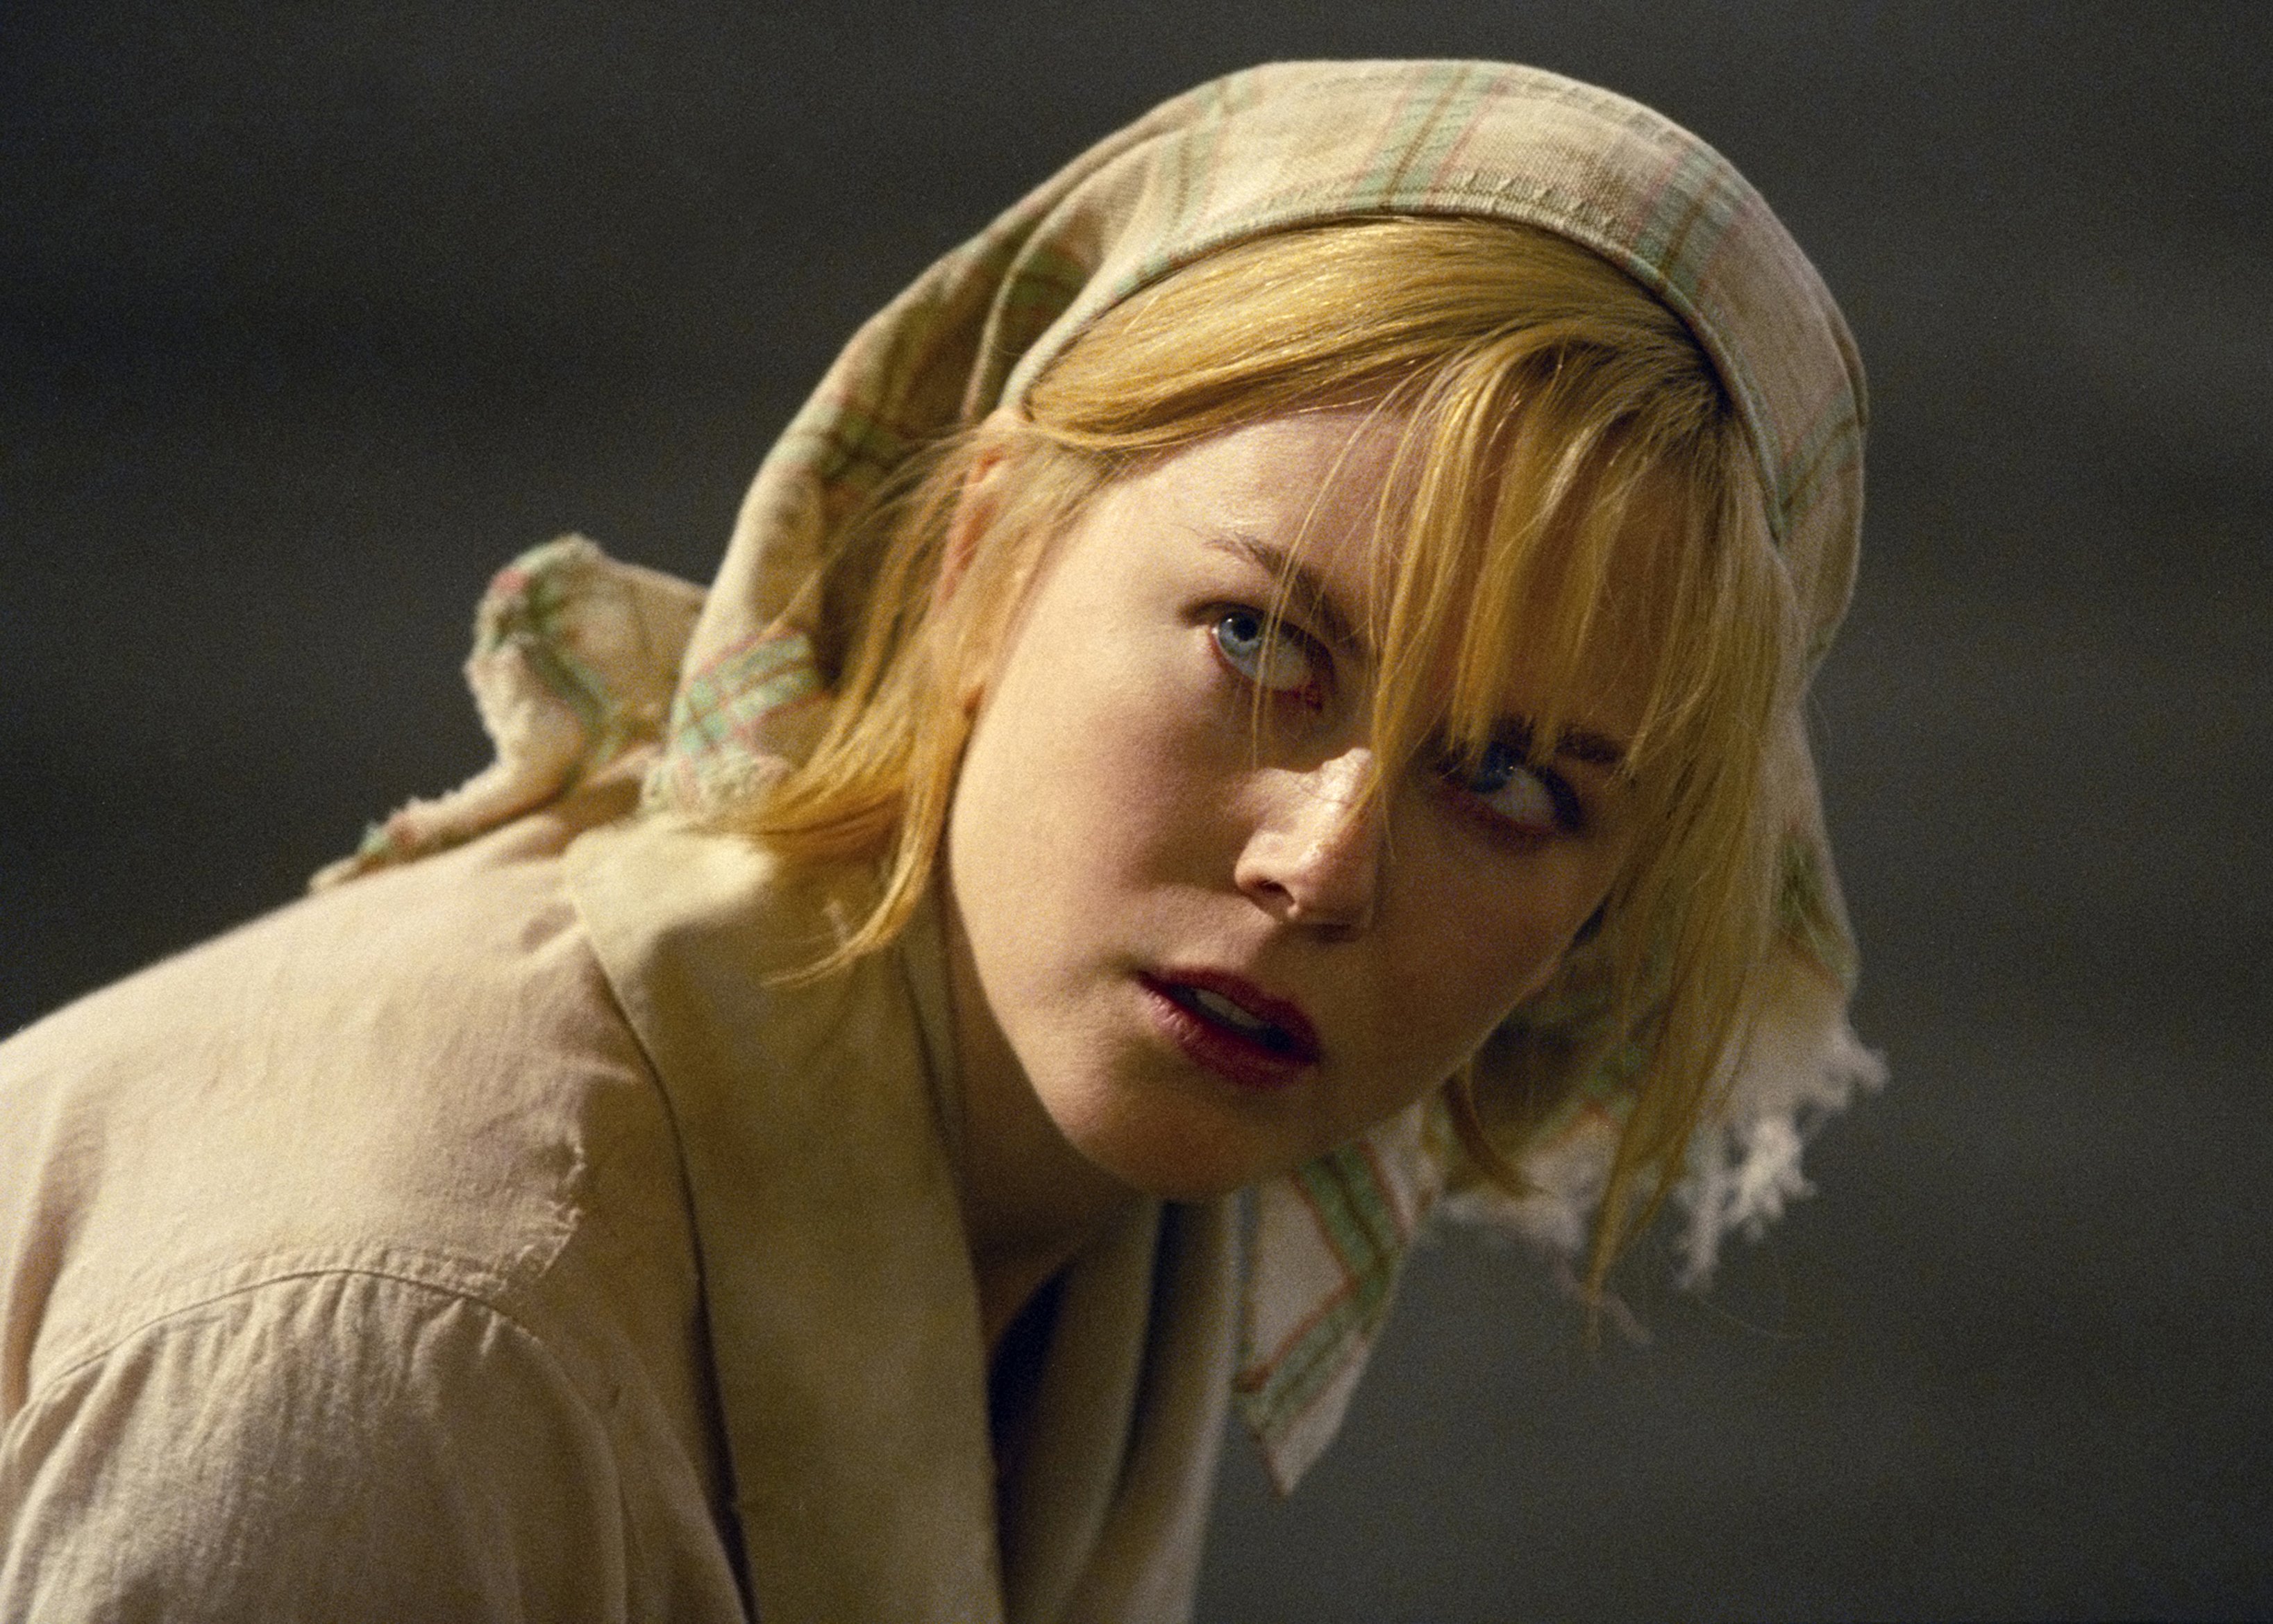 Nicole Kidman as Grace Margaret Mulligan in "Dogville", directed by Lars Von Trier in Sweden, 2002 | Getty Images